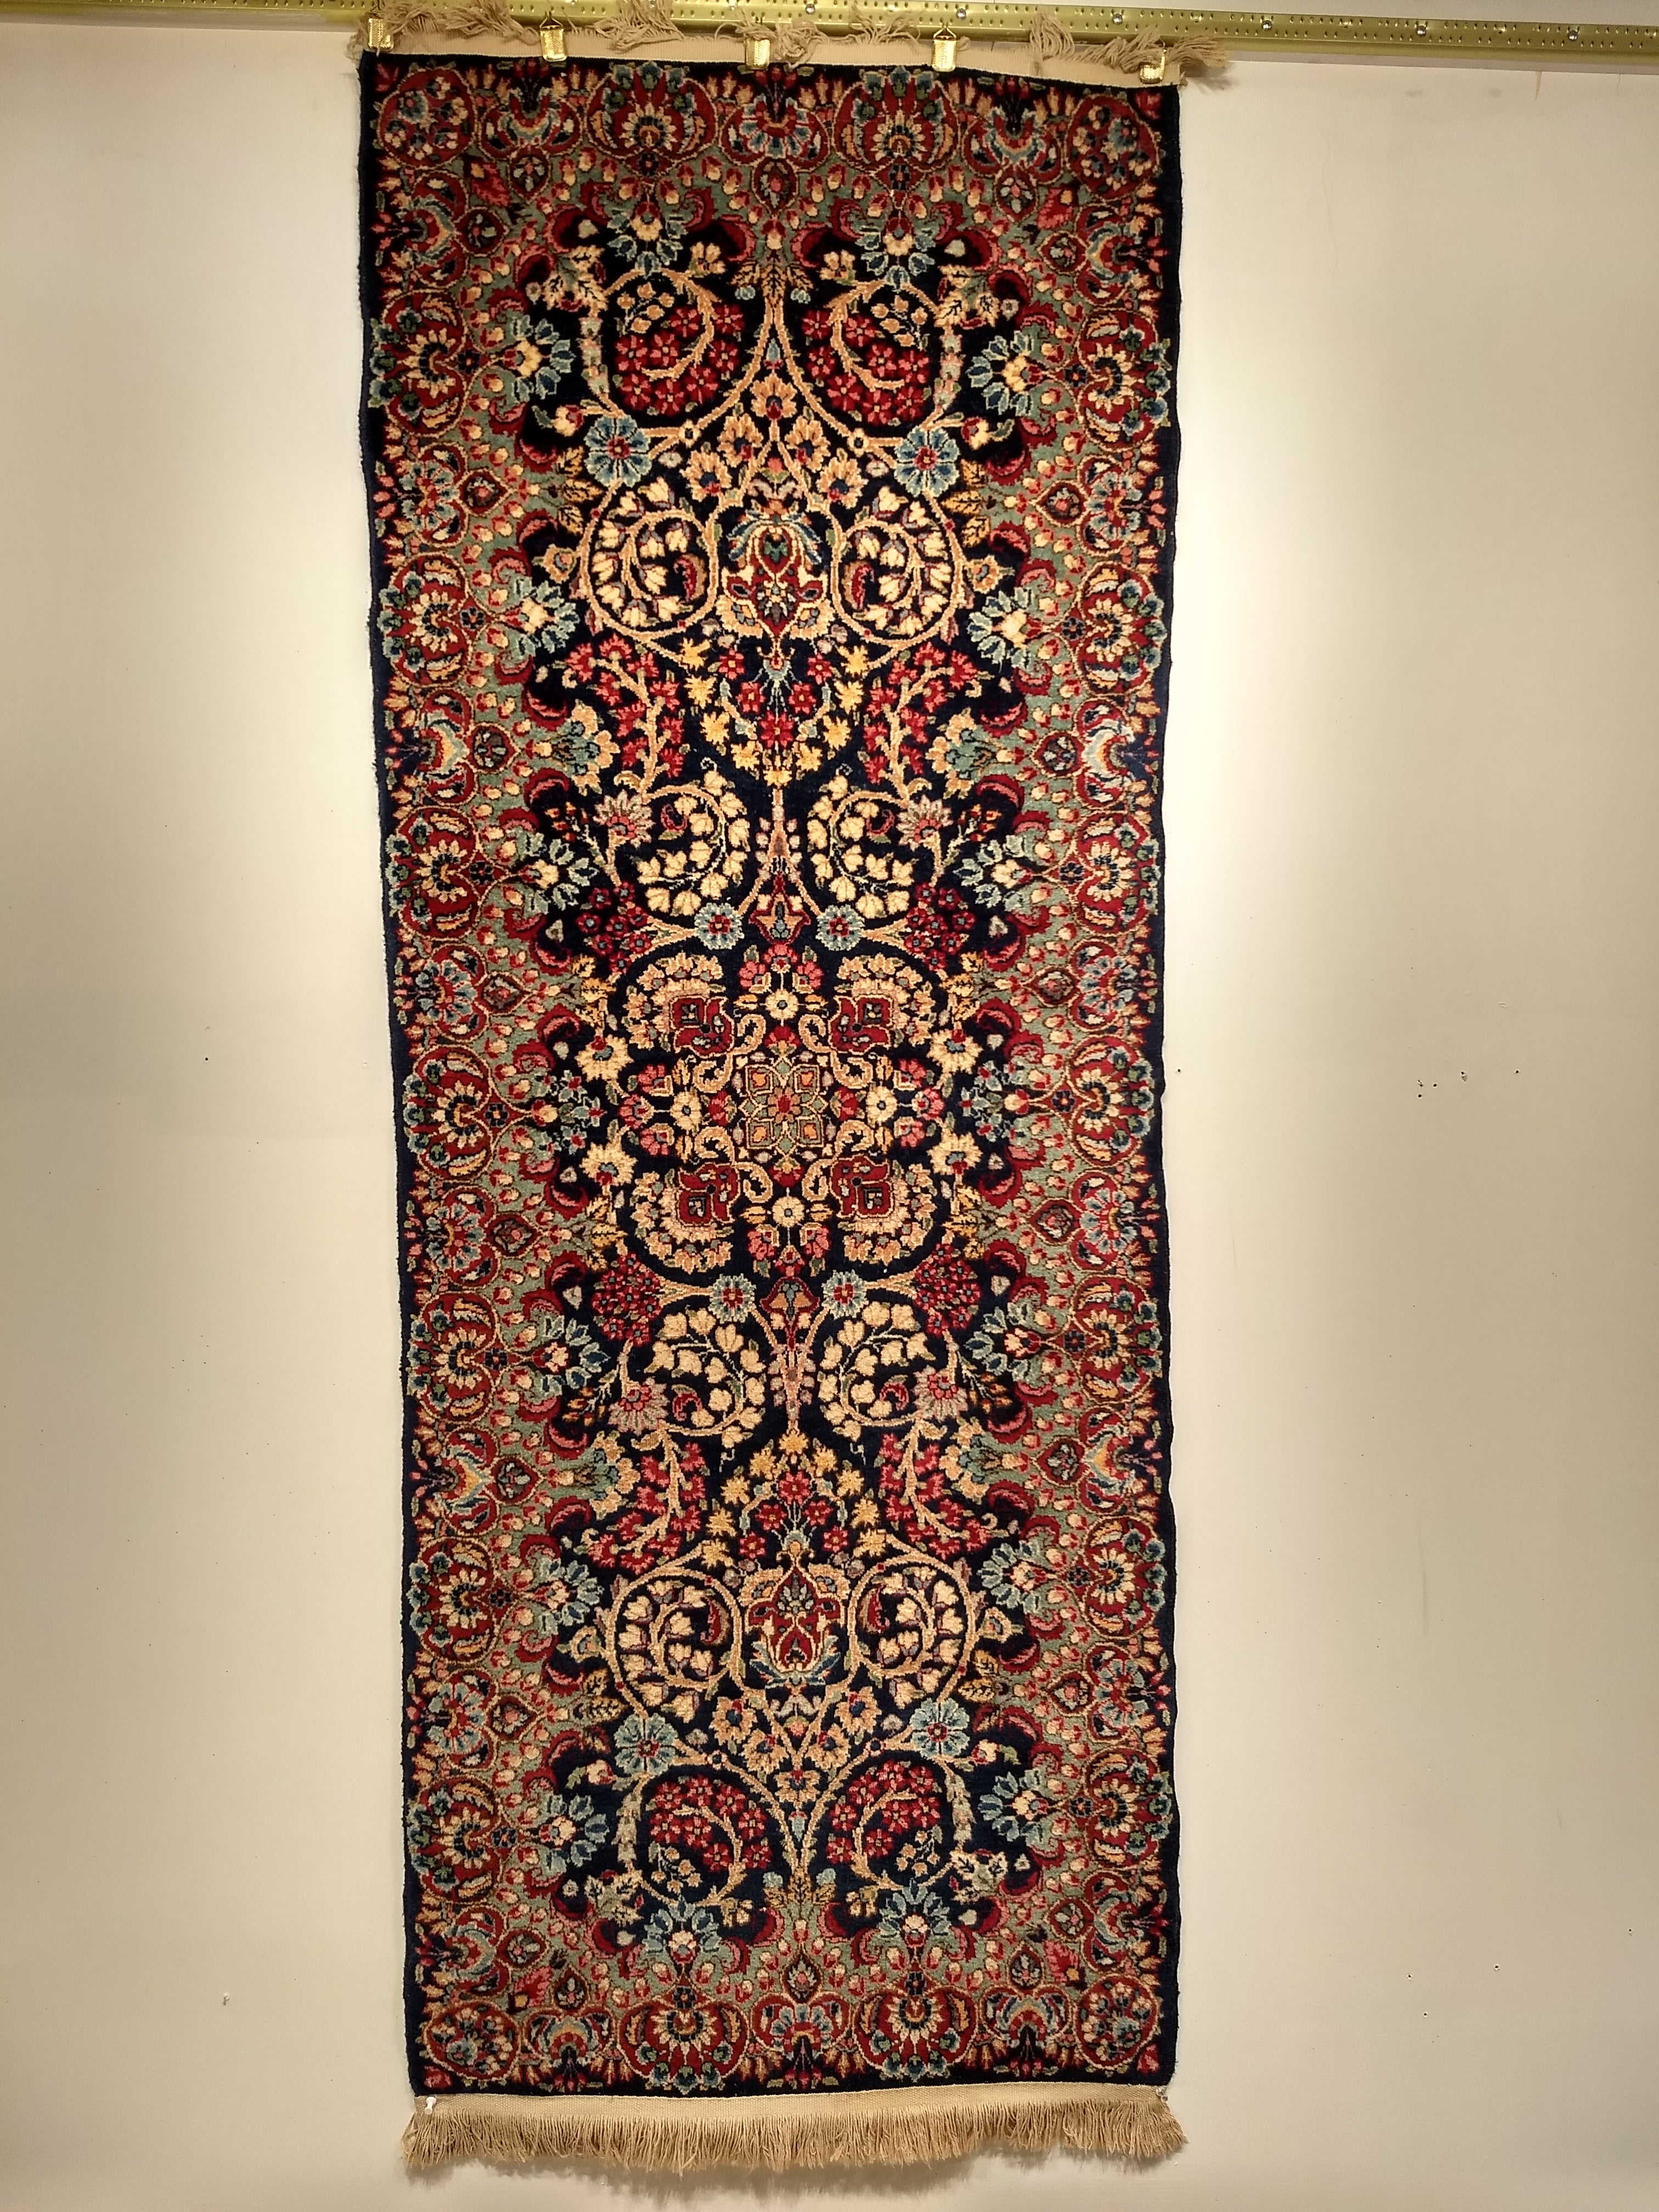 A beautiful vintage Persian Kerman runner or area rug with an all-over floral pattern from the early 1900s.  The rug has a navy blue field color with floral designs in green, baby blue, ivory, and red.
Dimensions:  2′ 6″ x 6′ 6″
Date of Manufacture: